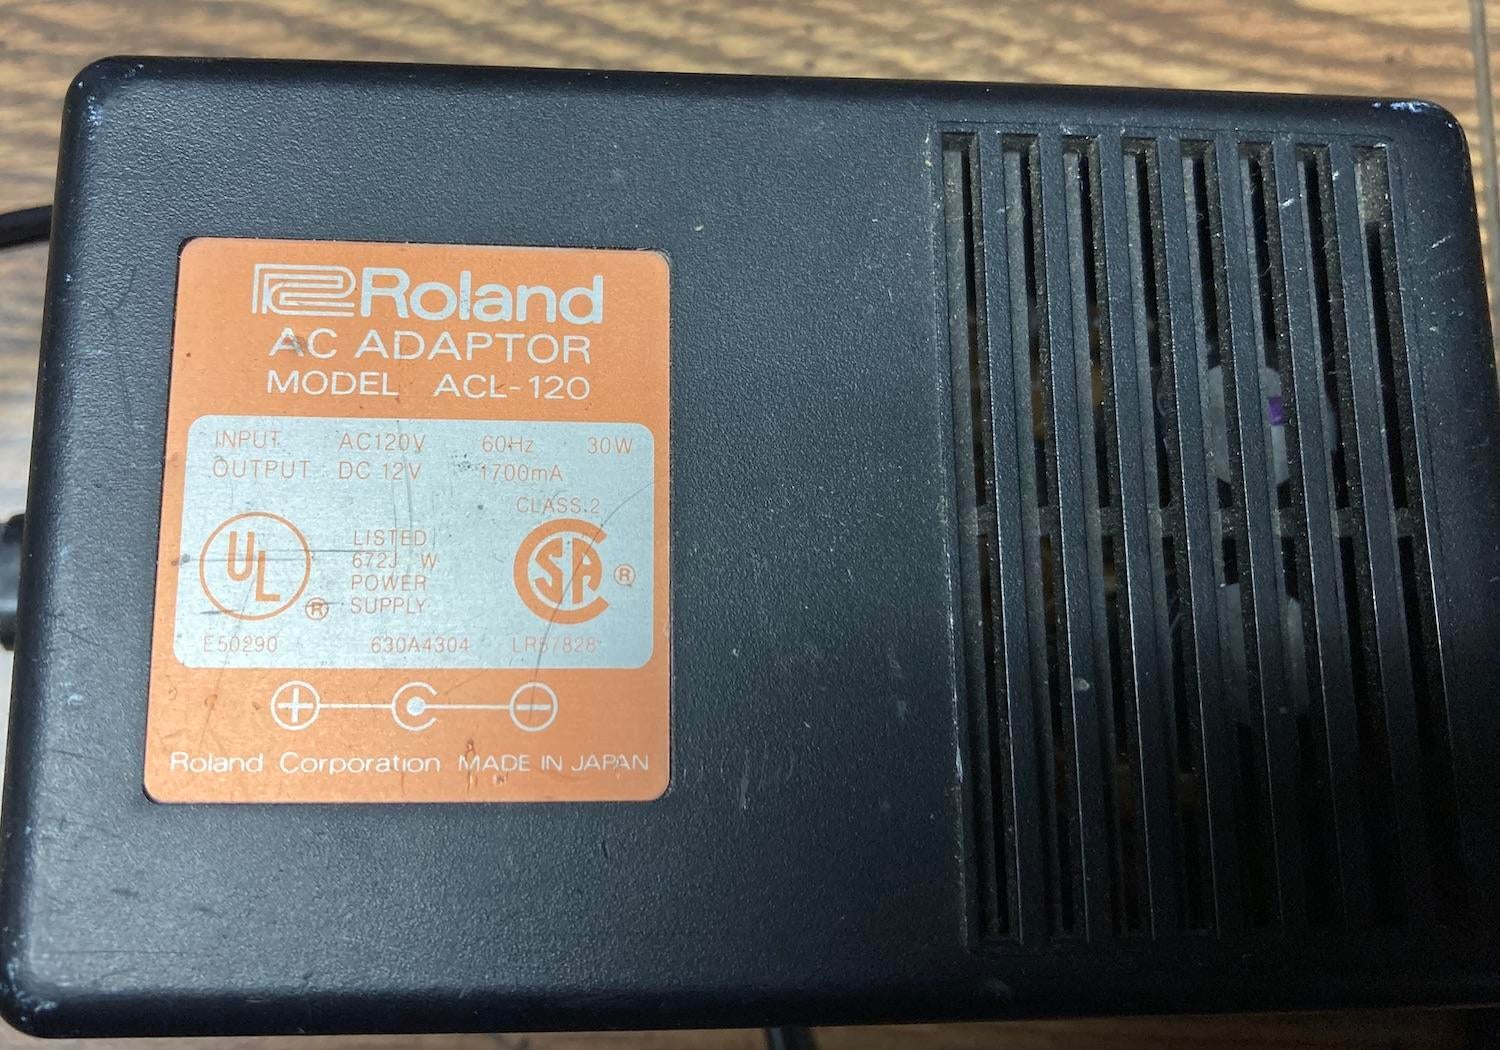 Used Roland AC adaptor model acl-120